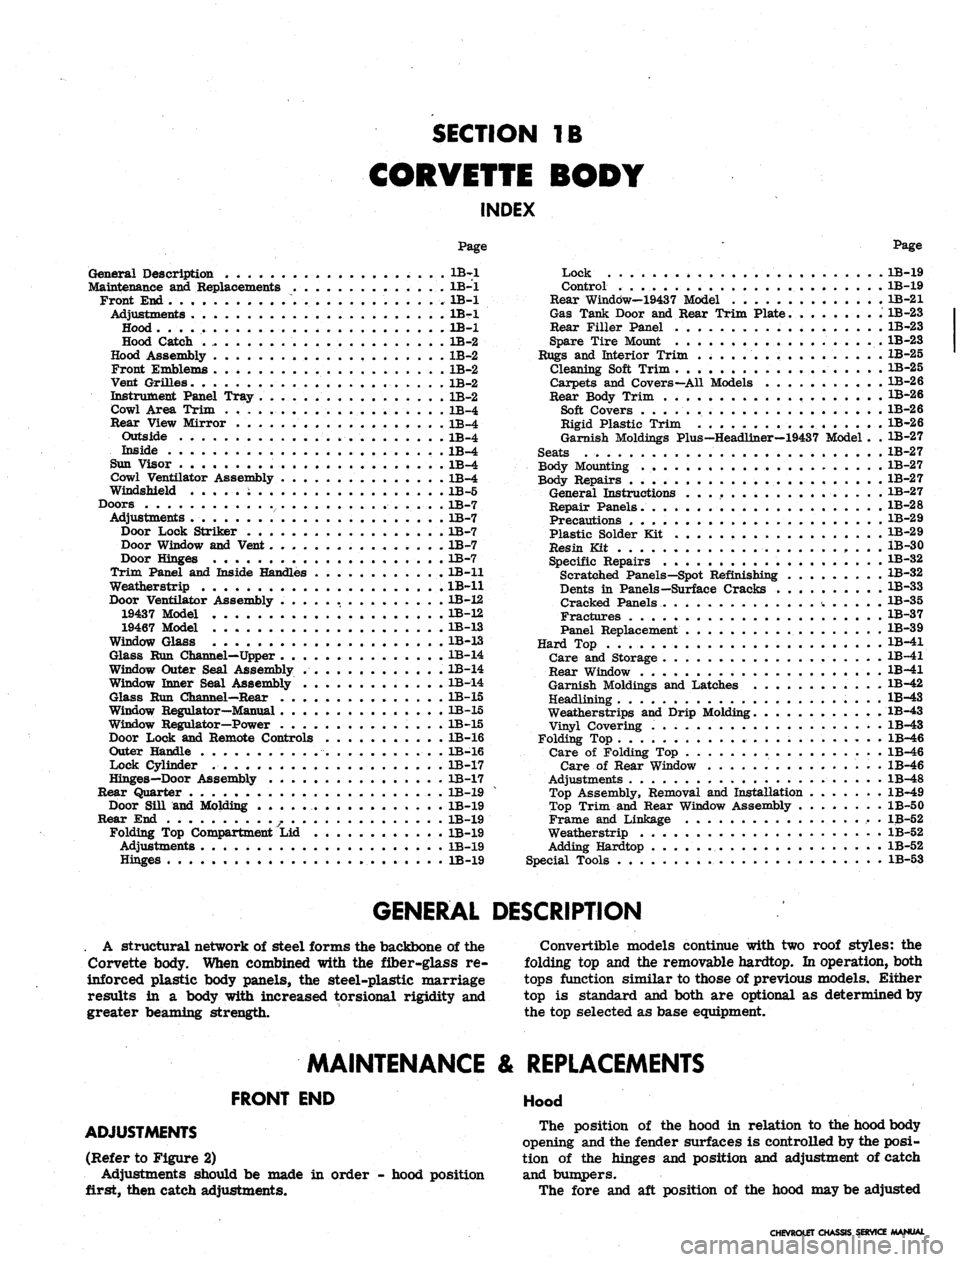 CHEVROLET CAMARO 1967 1.G Chassis Workshop Manual 
SECTION
 IB

CORVETTE BODY

INDEX

Page

General Description . . * • •.
 •
 ^"i1

Maintenance and Replacements 1B-1

Front End 1B-1

Adjustments IBri

Hood 1B-1

Hood Catch 1B-2

Hood Assembly 